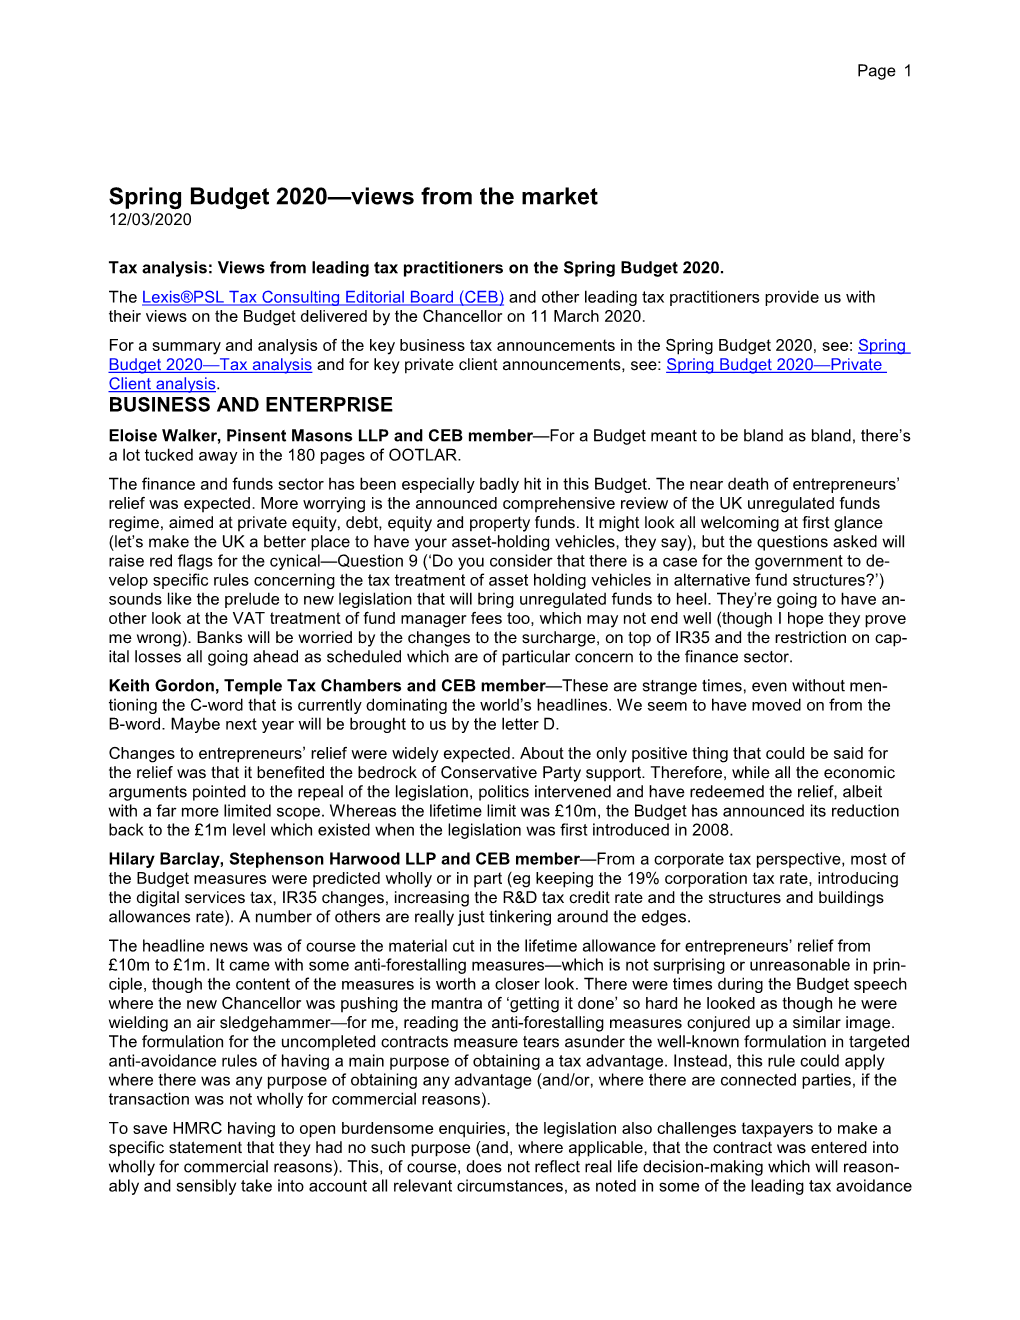 Spring Budget 2020—Views from the Market 12/03/2020